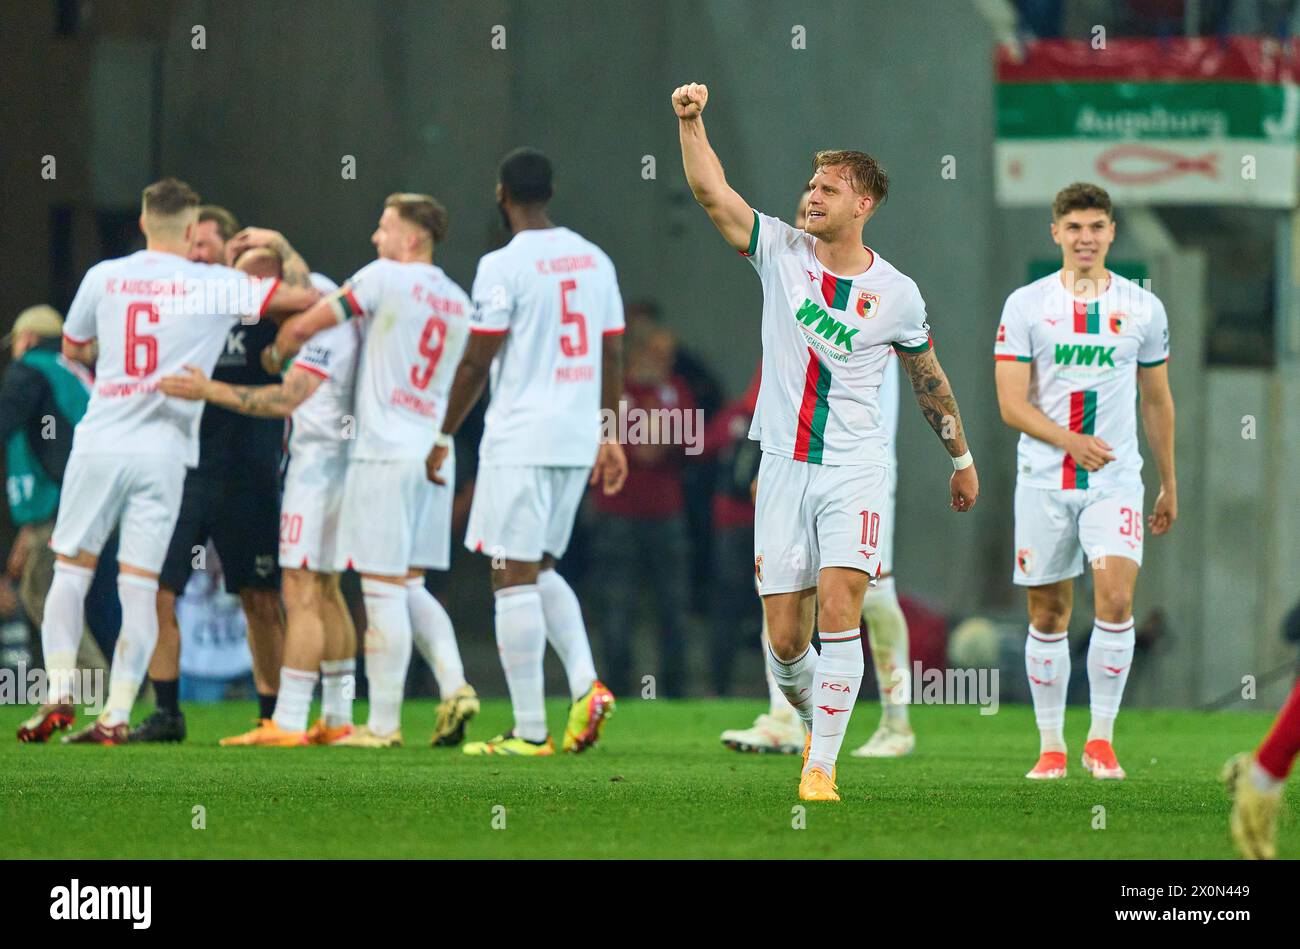 celebration 2-0 goal, happy, laugh, celebration, of Sven Michel, FCA 20  in the match FC AUGSBURG - 1. FC Union Berlin 2-0  on Apr 12, 2024 in Augsburg, Germany. Season 2023/2024, 1.Bundesliga, FCA, matchday 29, 29.Spieltag Photographer: ddp images / star-images    - DFL REGULATIONS PROHIBIT ANY USE OF PHOTOGRAPHS as IMAGE SEQUENCES and/or QUASI-VIDEO - Stock Photo